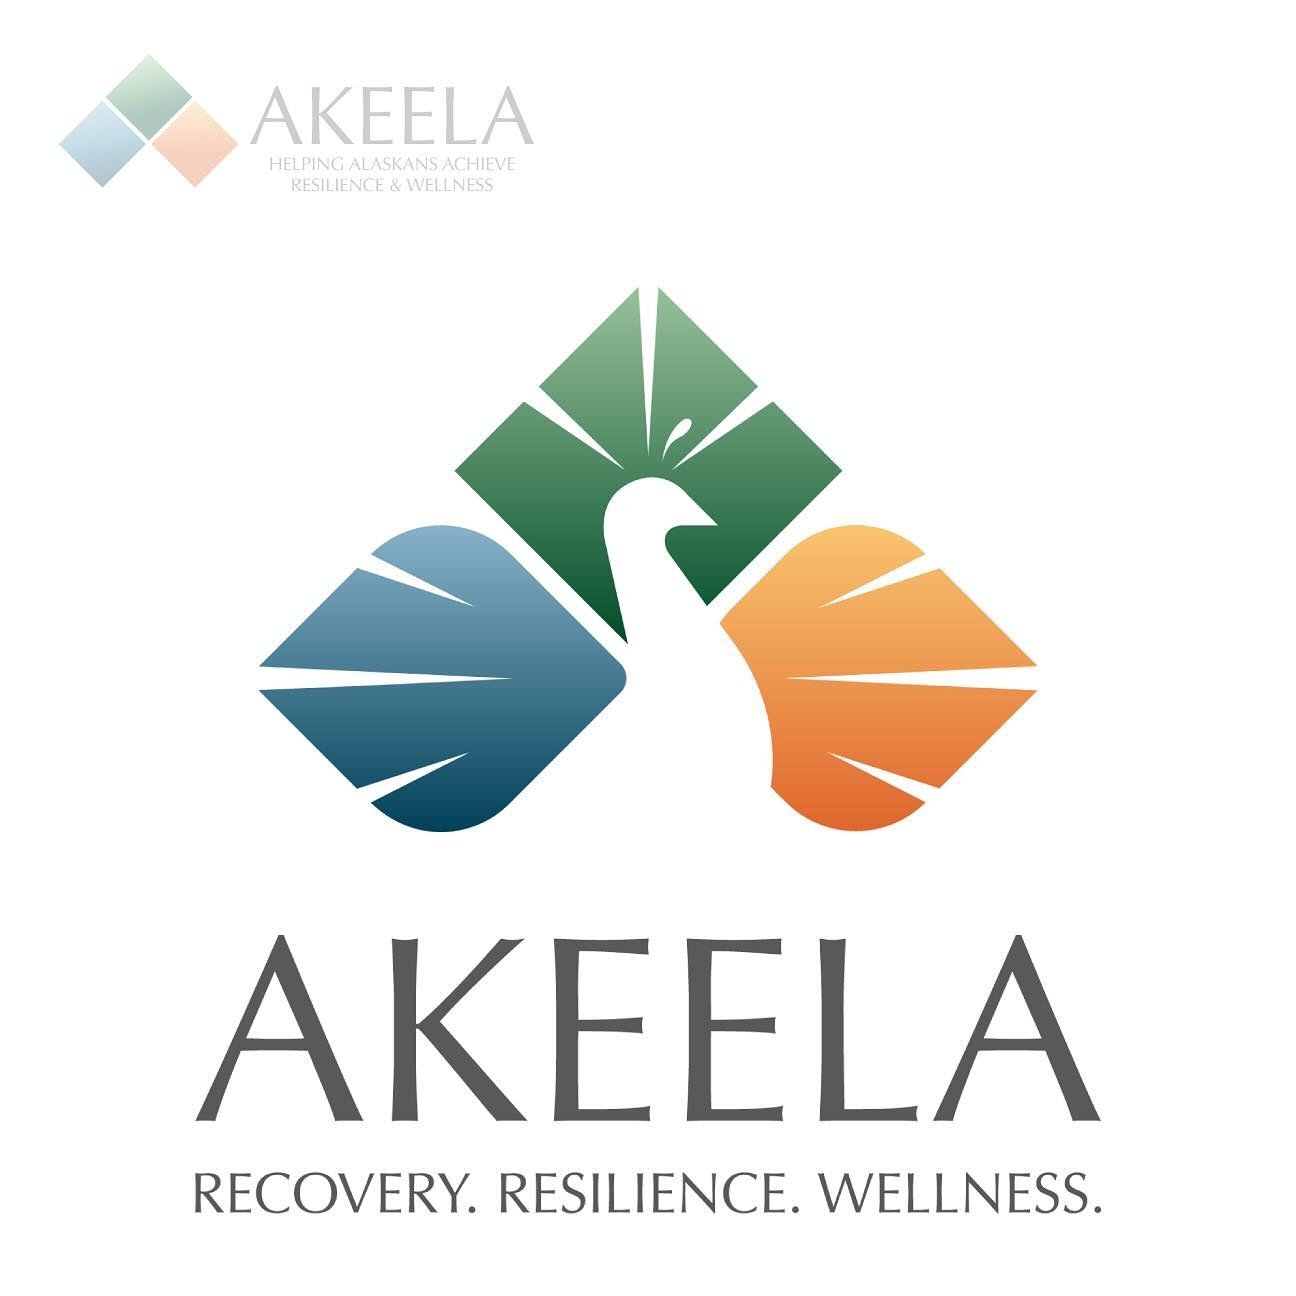 We were asked to turn Akeela&rsquo;s logo into a peacock. ✅ Maybe every logo should have a bird alter ego. #poeticadesign #peacock